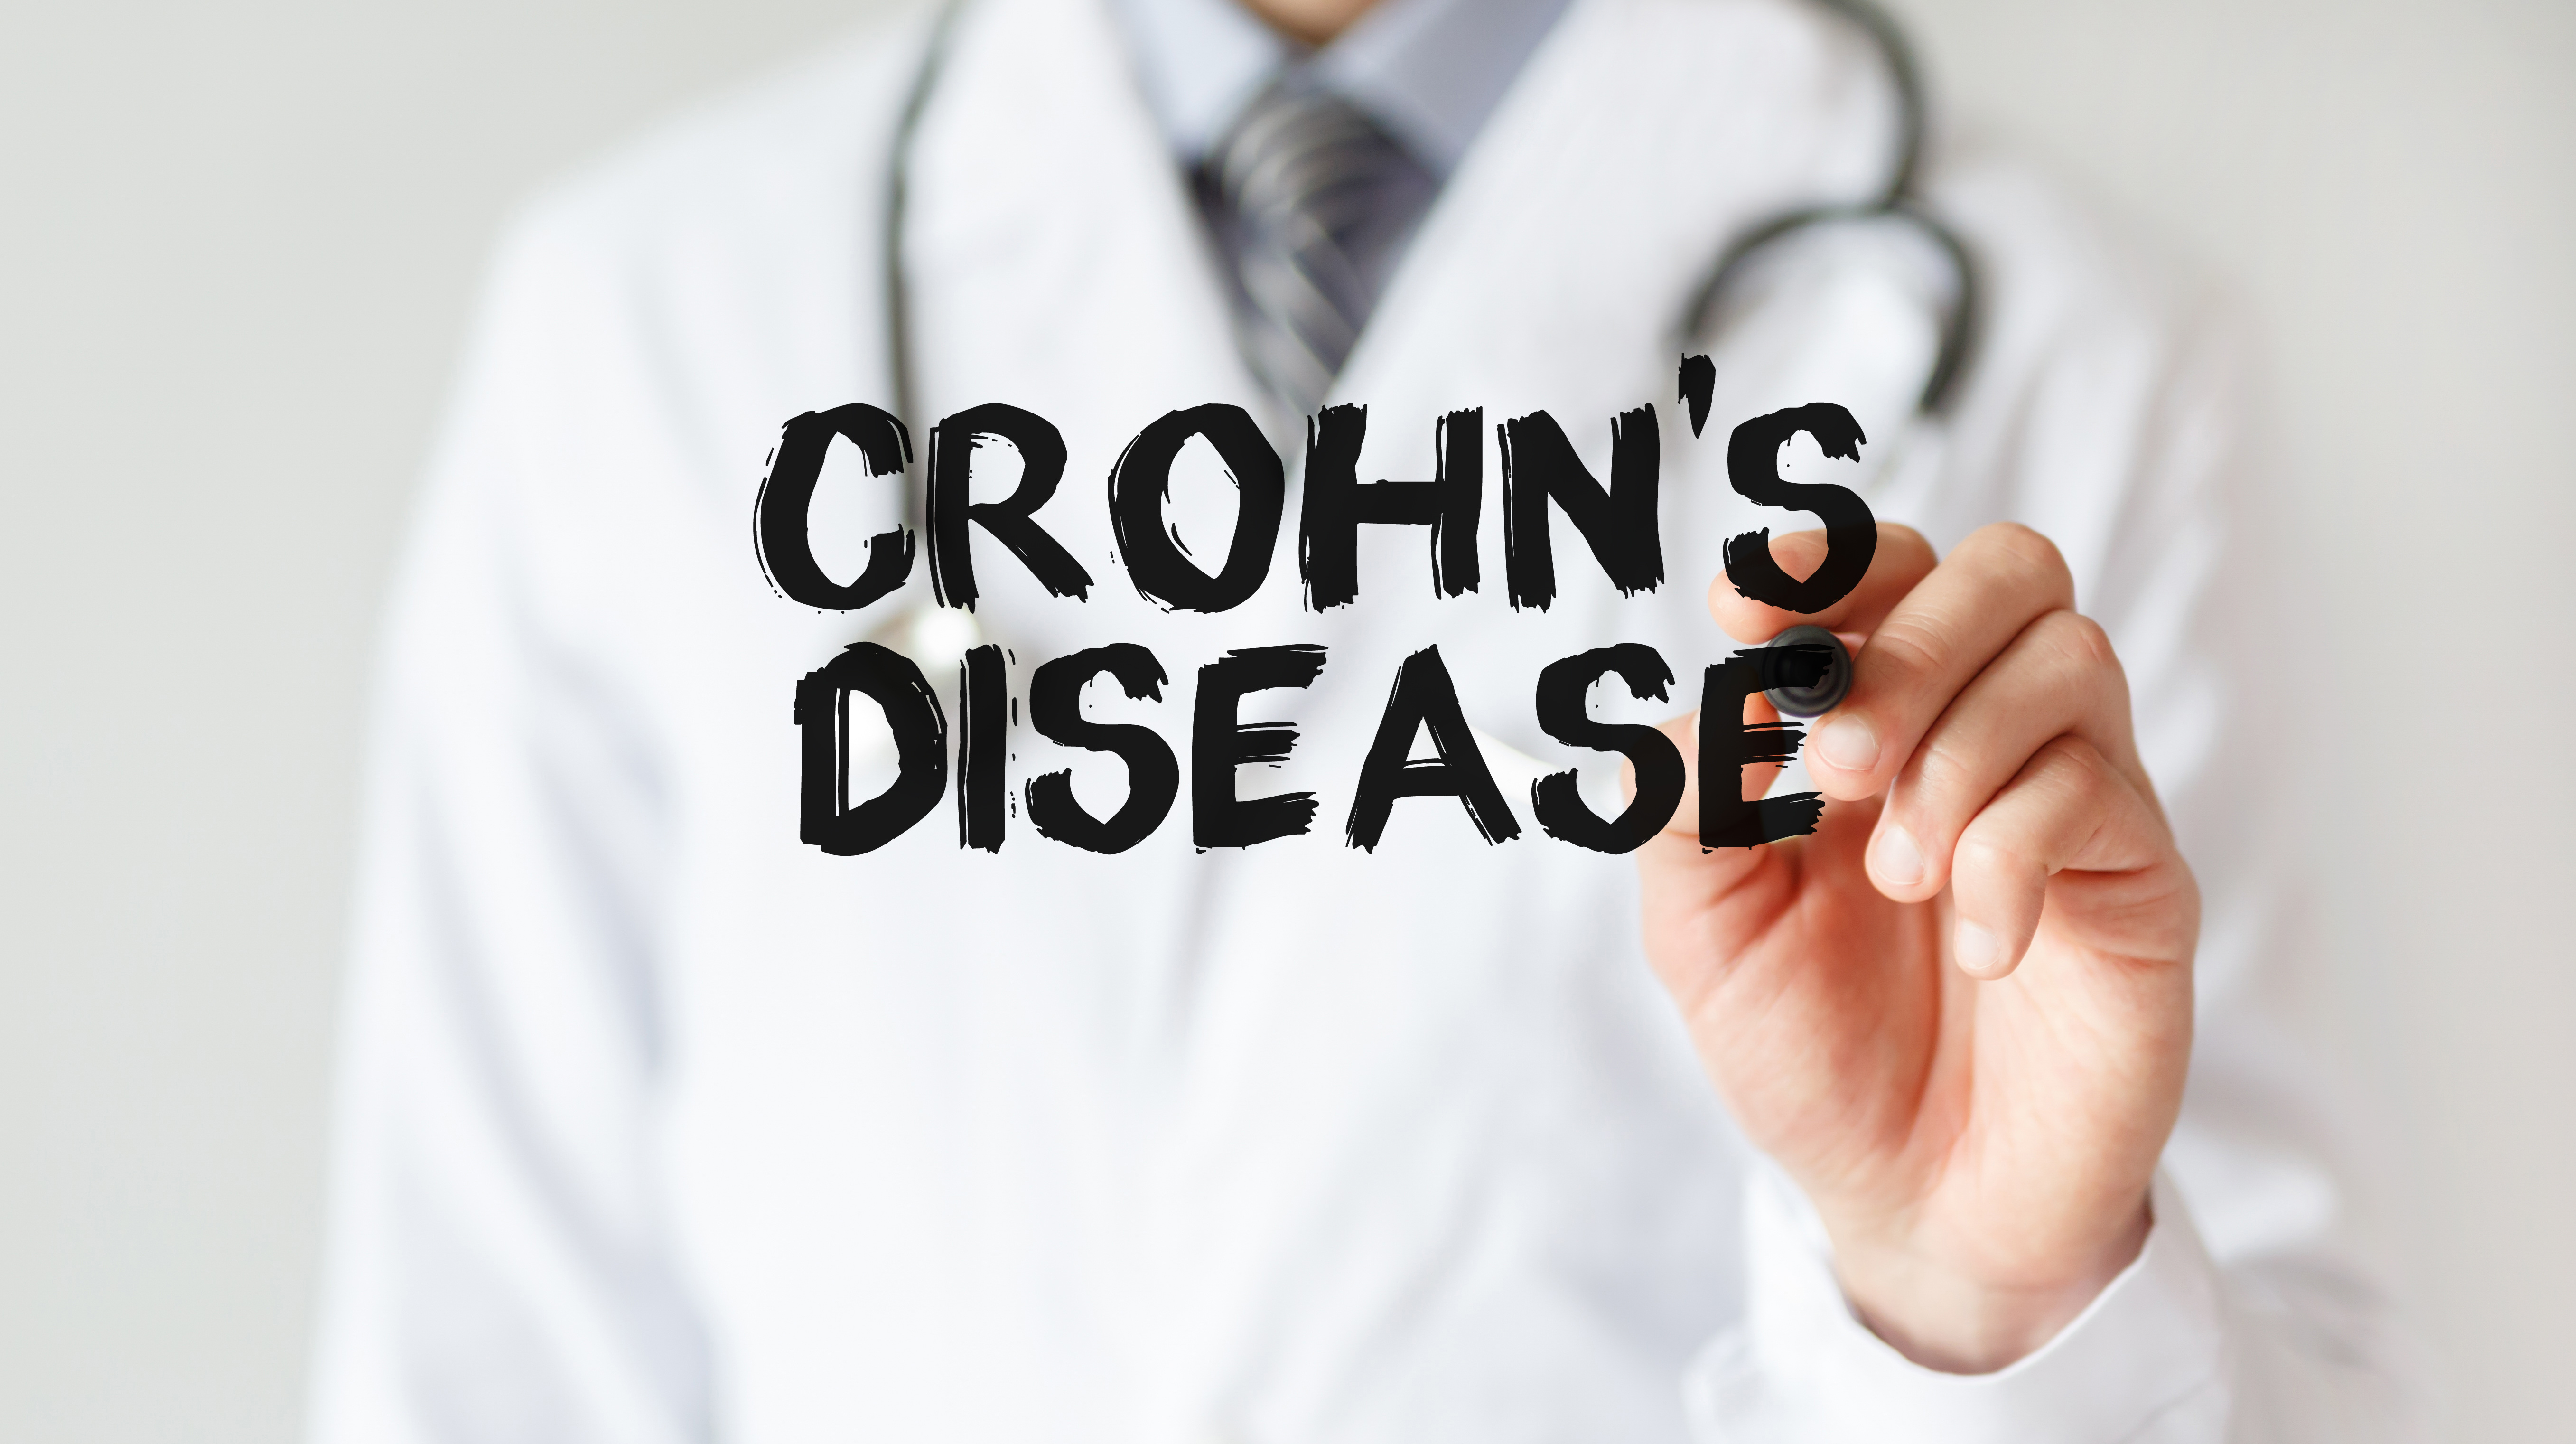 life-insurance-with-crohns-disease-concept